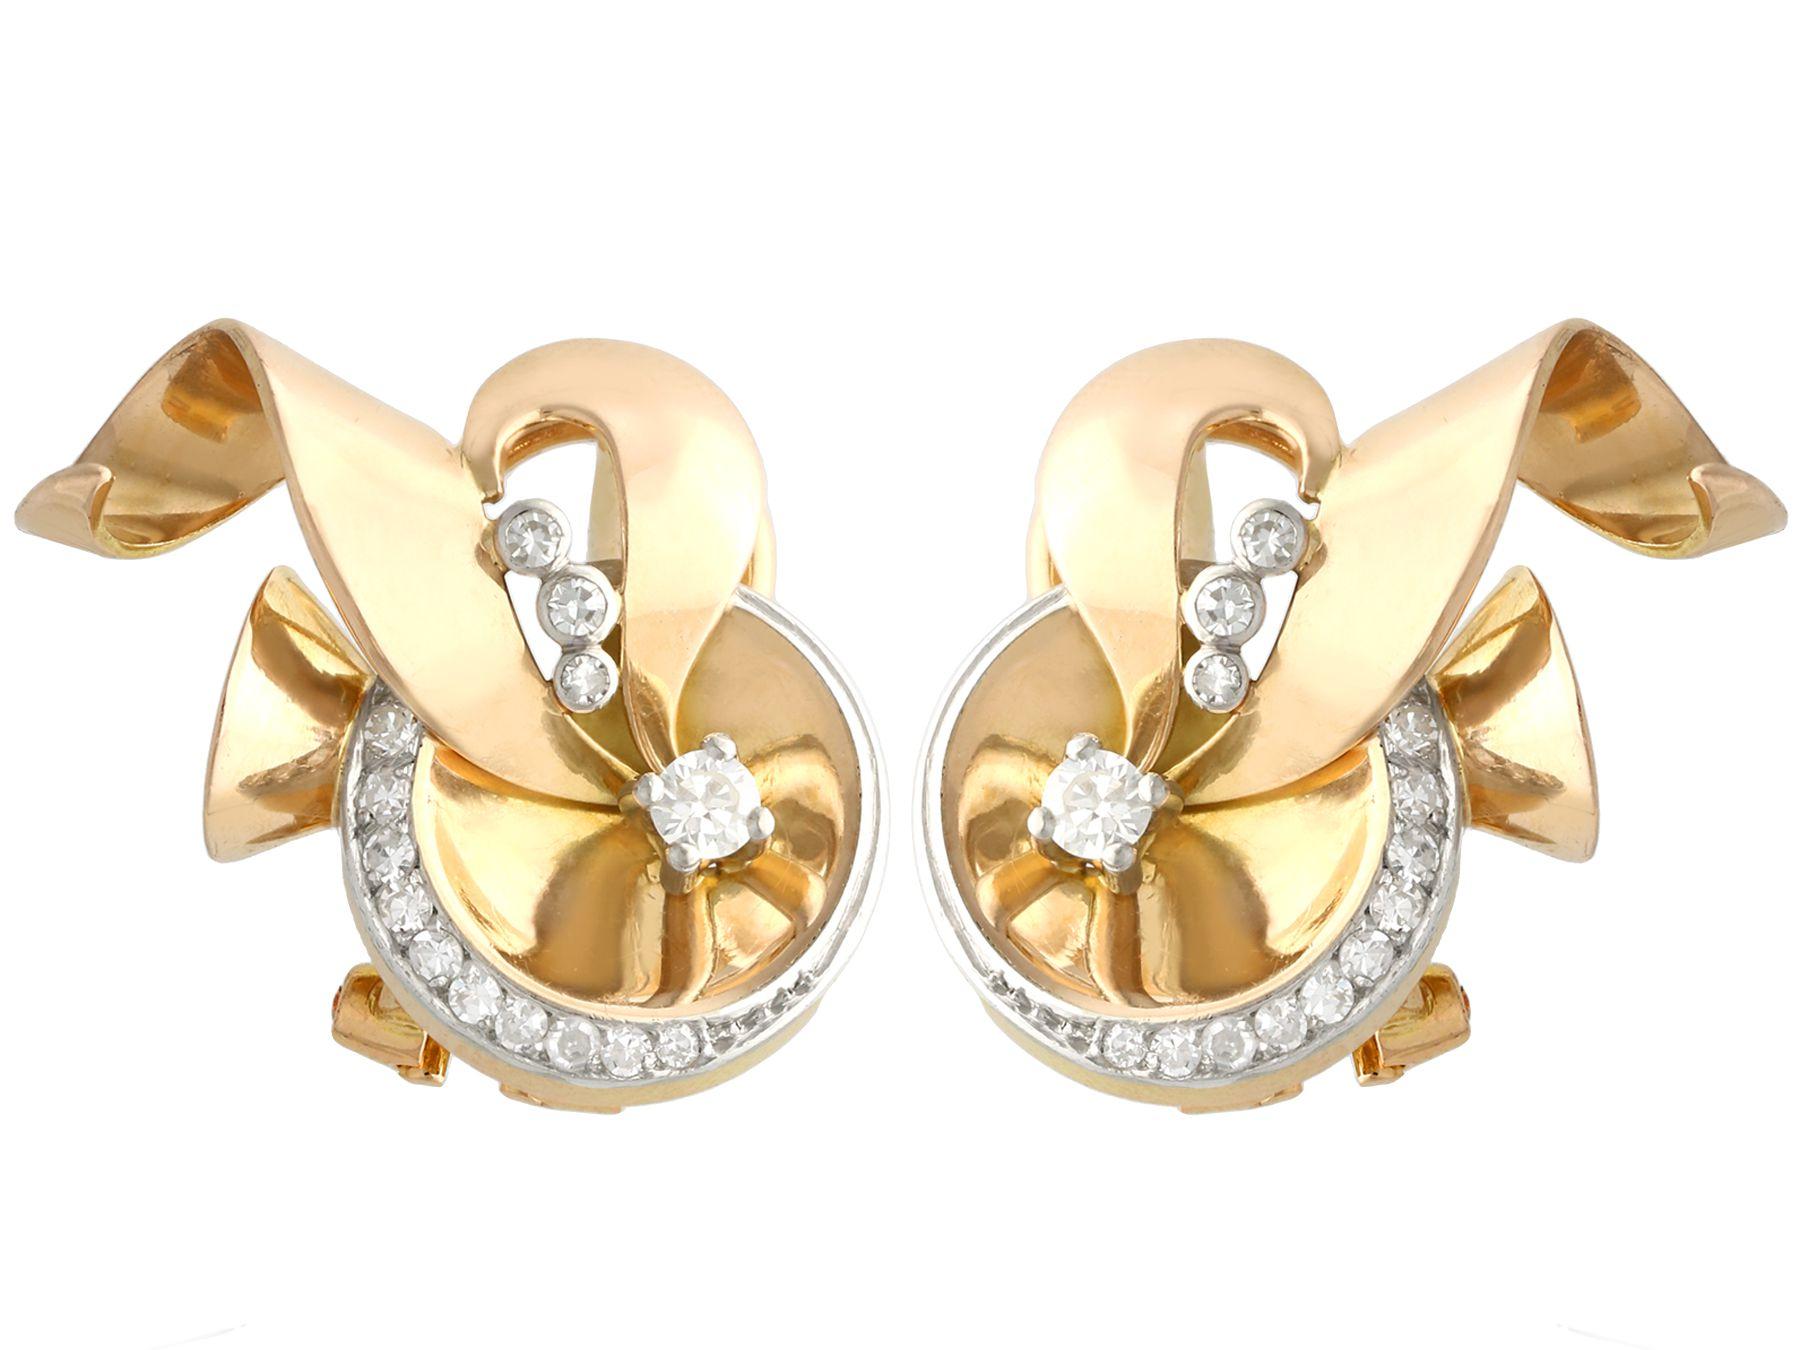 A fine and impressive pair of vintage 1940s 0.44 carat diamond and 18 karat yellow gold earrings; part of our diverse vintage jewellery and estate jewelry collections.

These fine and impressive vintage Art Deco earrings have been crafted in 18k